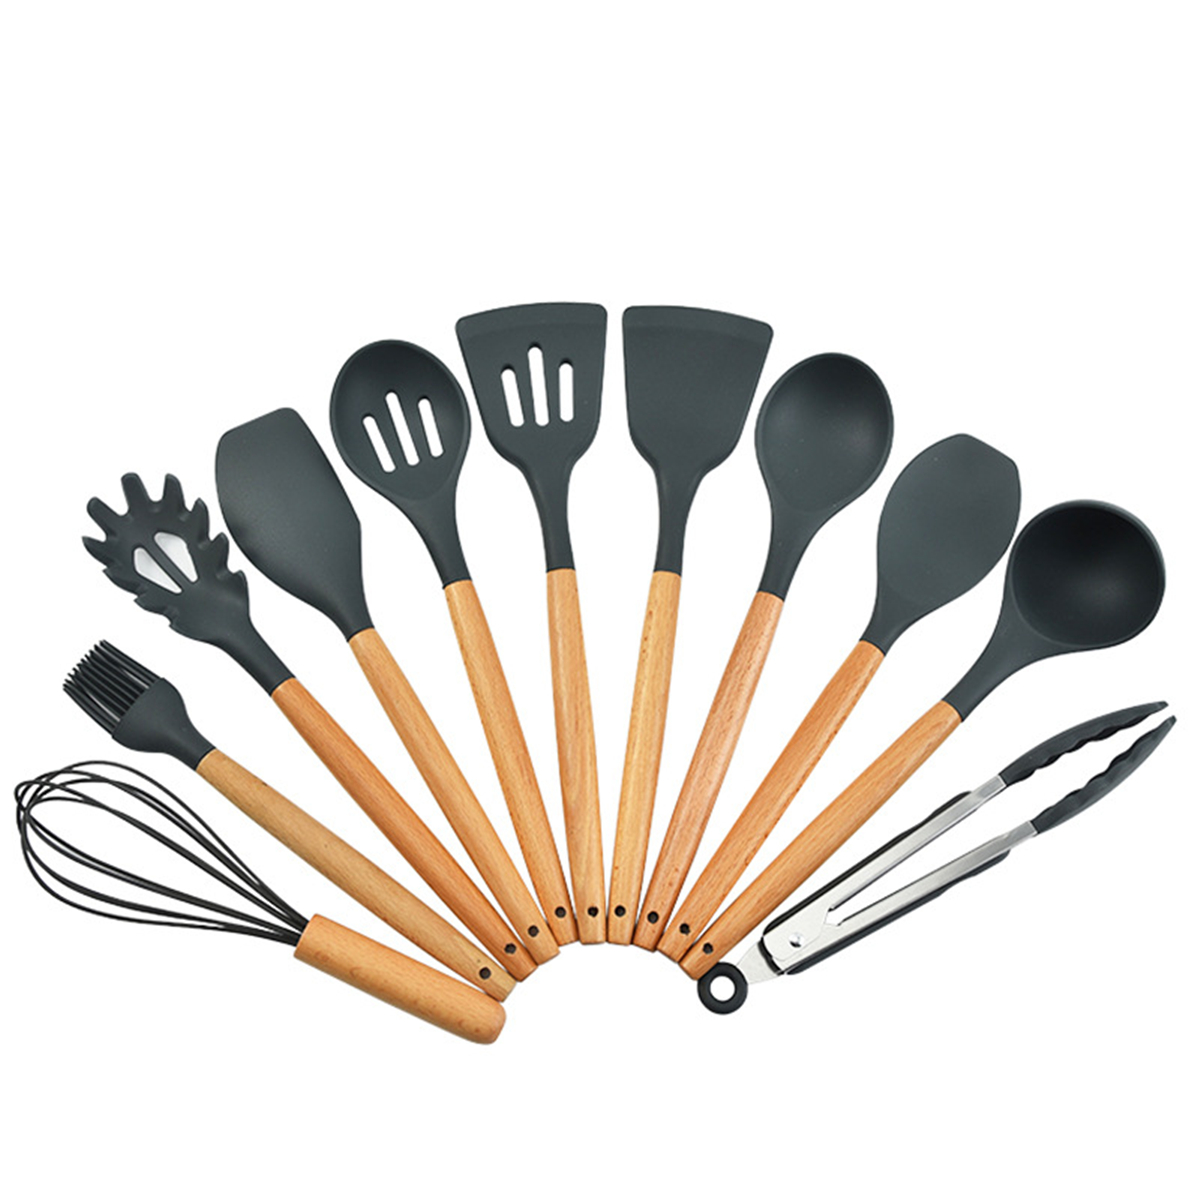 12-Pcs-Tableware-Set-Silicone-Wooden-Handle-Flatware-Spoon-Tongs-Whisk-Brush-with-Storage-Box-Outdoo-1812163-7